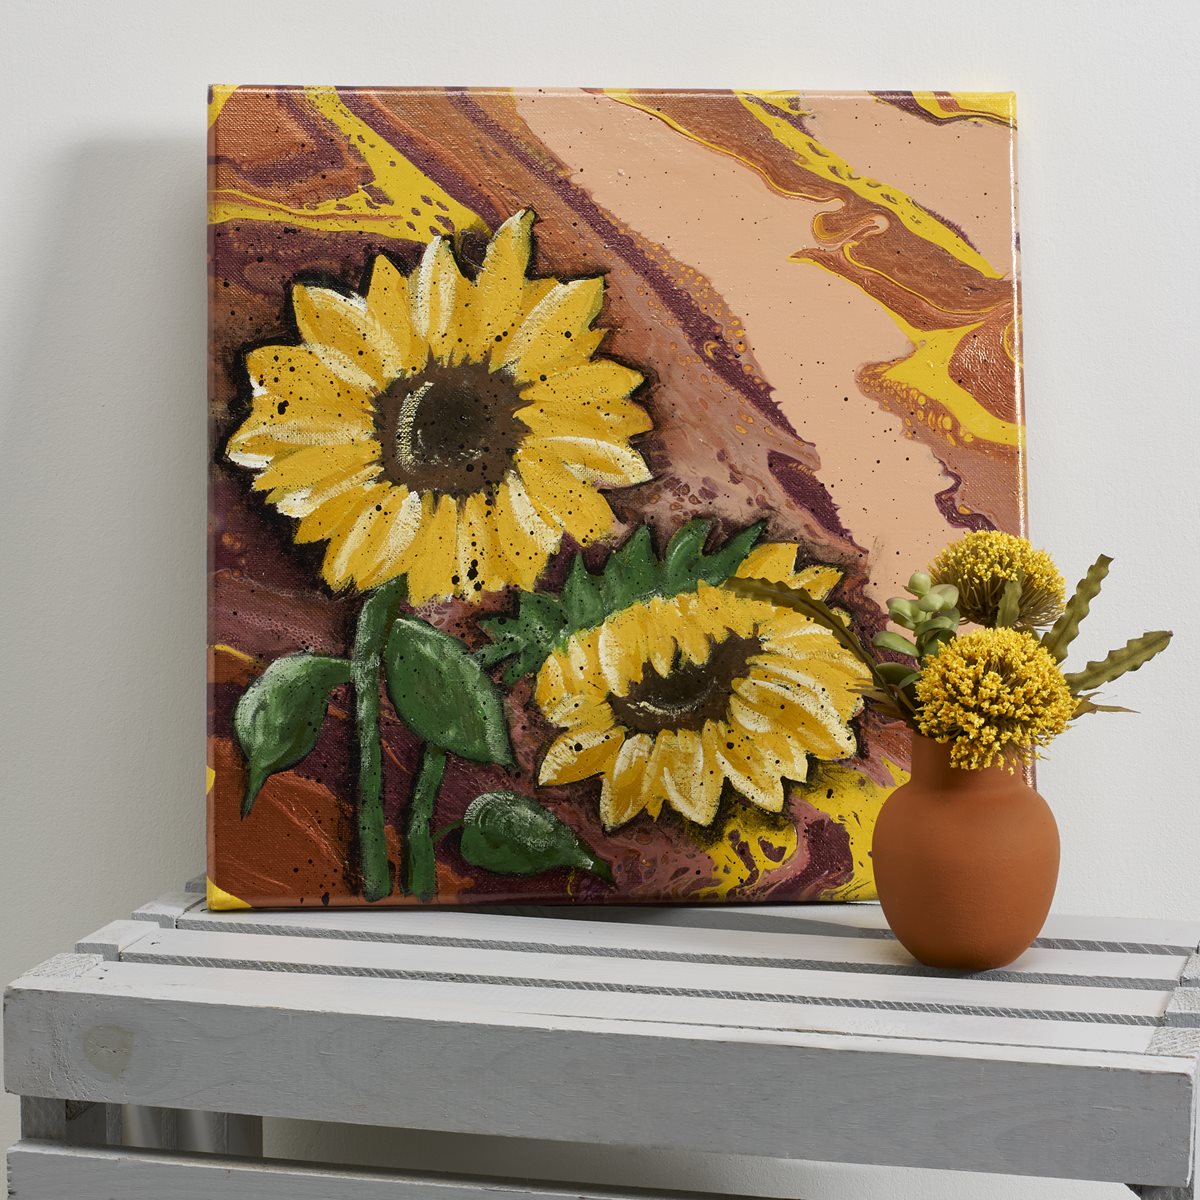 FolkArt Sunflowers on Poured Fall Colors